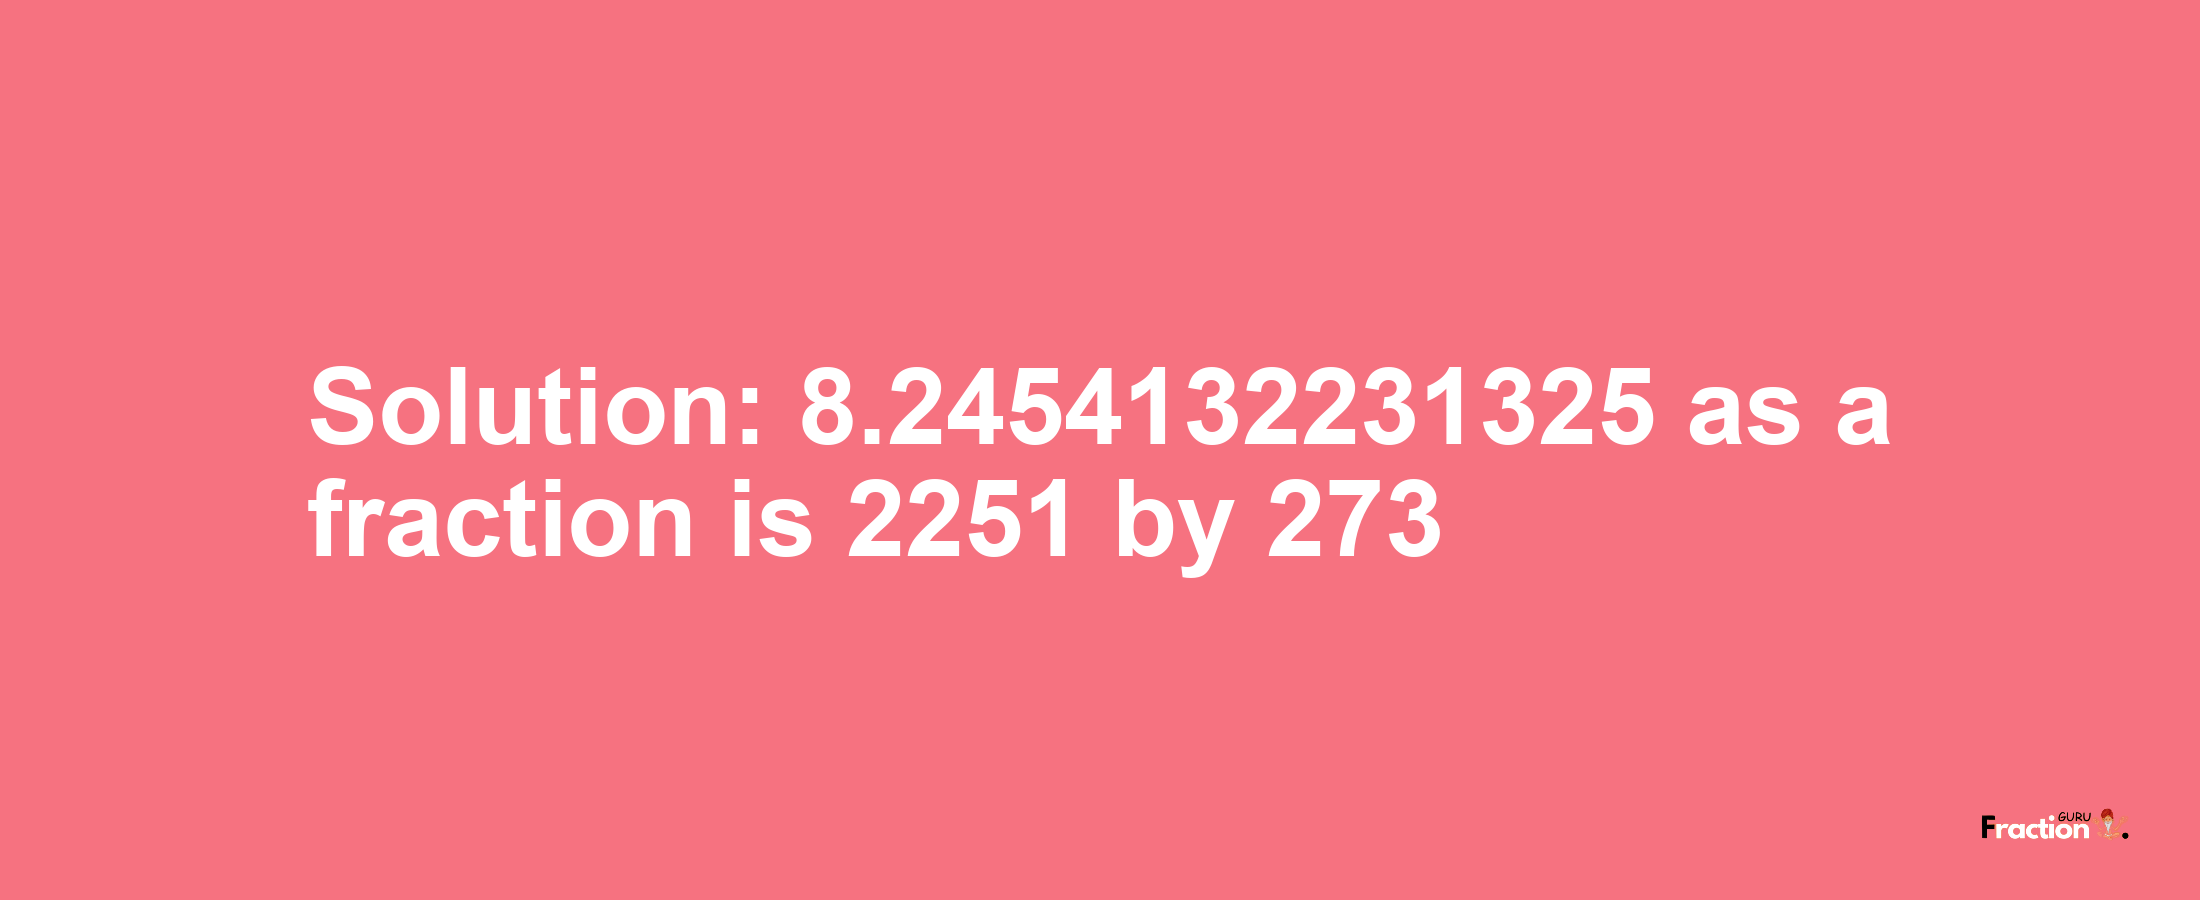 Solution:8.2454132231325 as a fraction is 2251/273